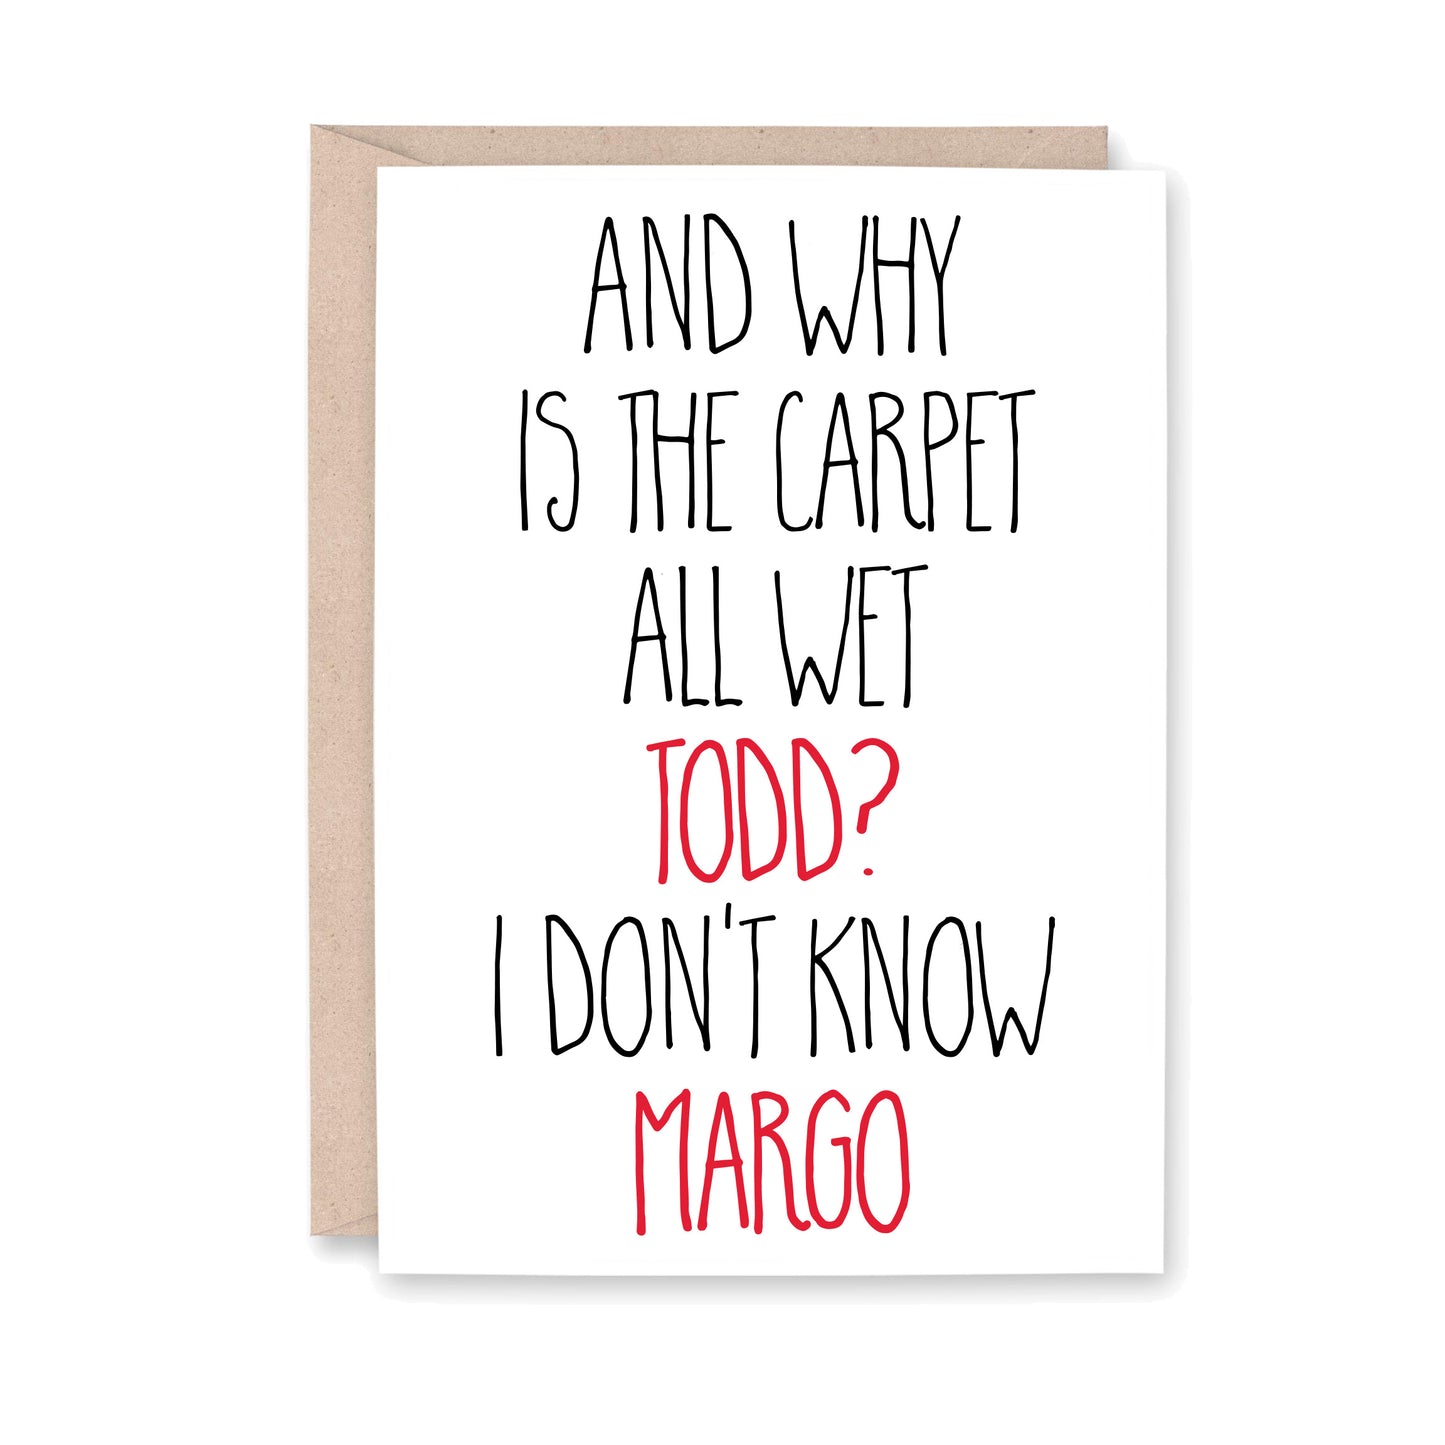 And why is the carpet all wet Todd? I don' t know Margo